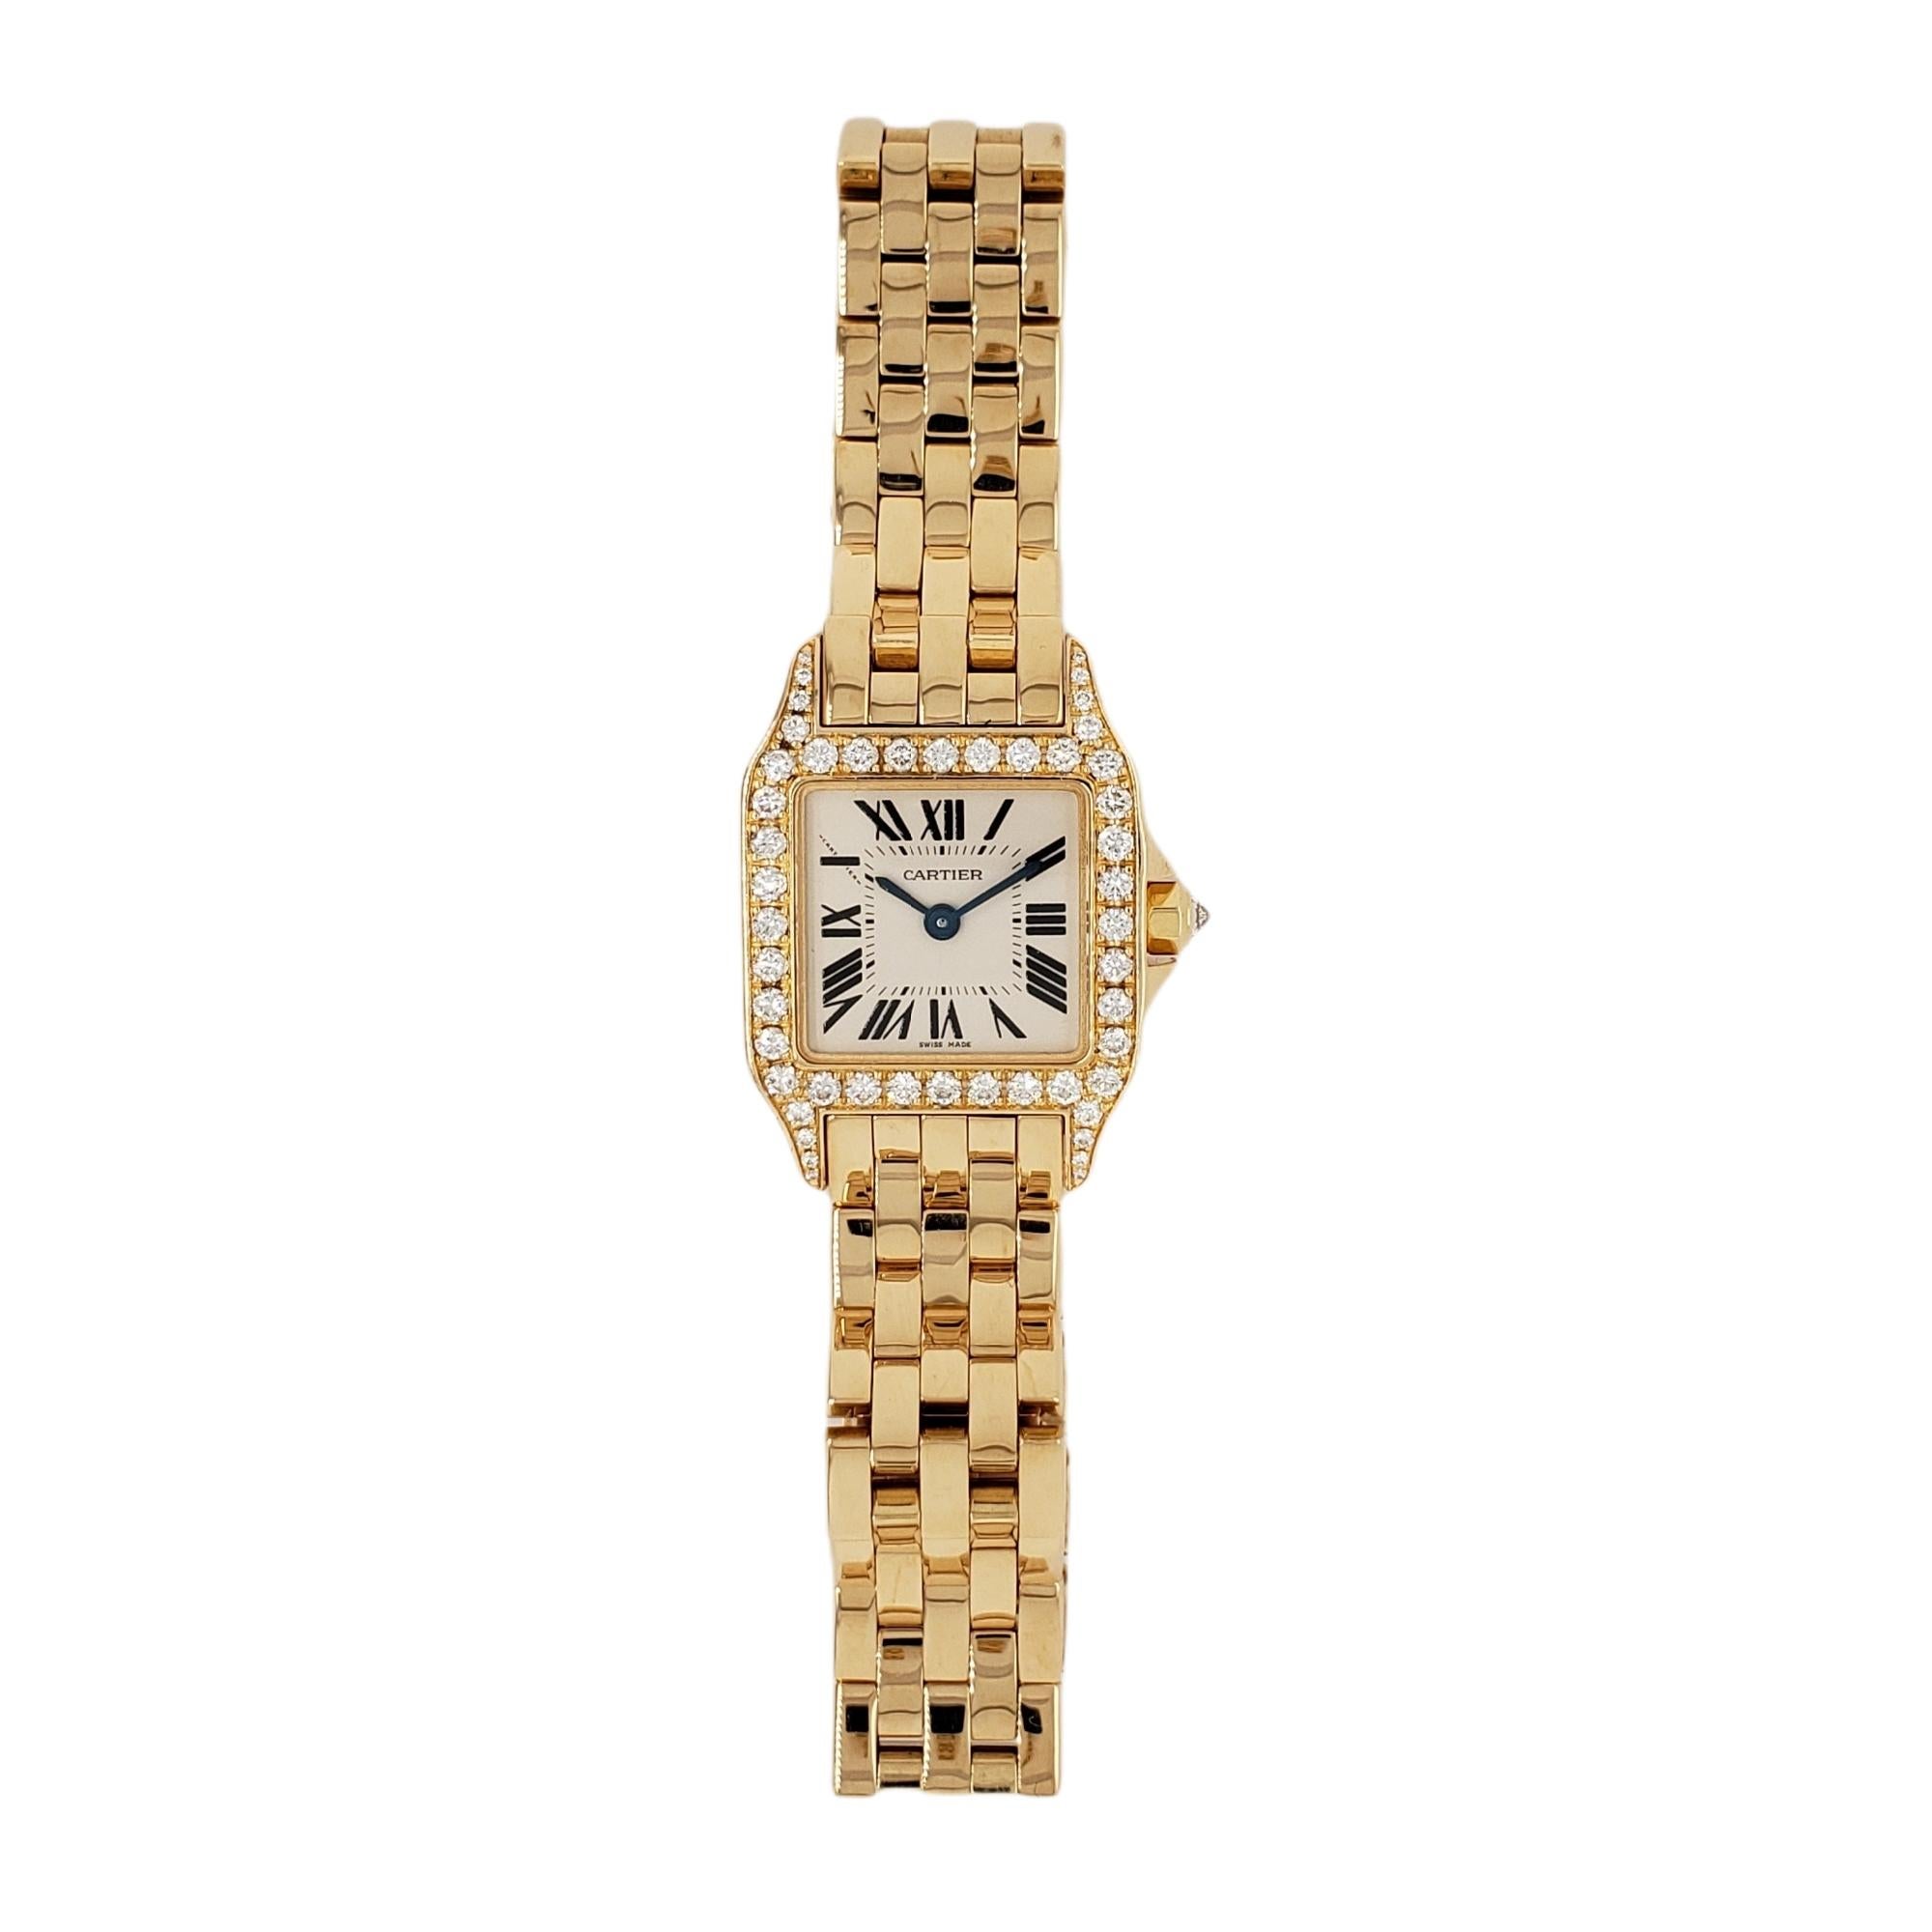 Cartier Santos Demoiselle in 18kt yellow gold featuring a diamond bezel, diamond lugs, and a diamond inverted crown. This timepiece is a quartz operated watch. Size 20mm x 28mm. Model # 2699. This Cartier has been expertly restored by our master